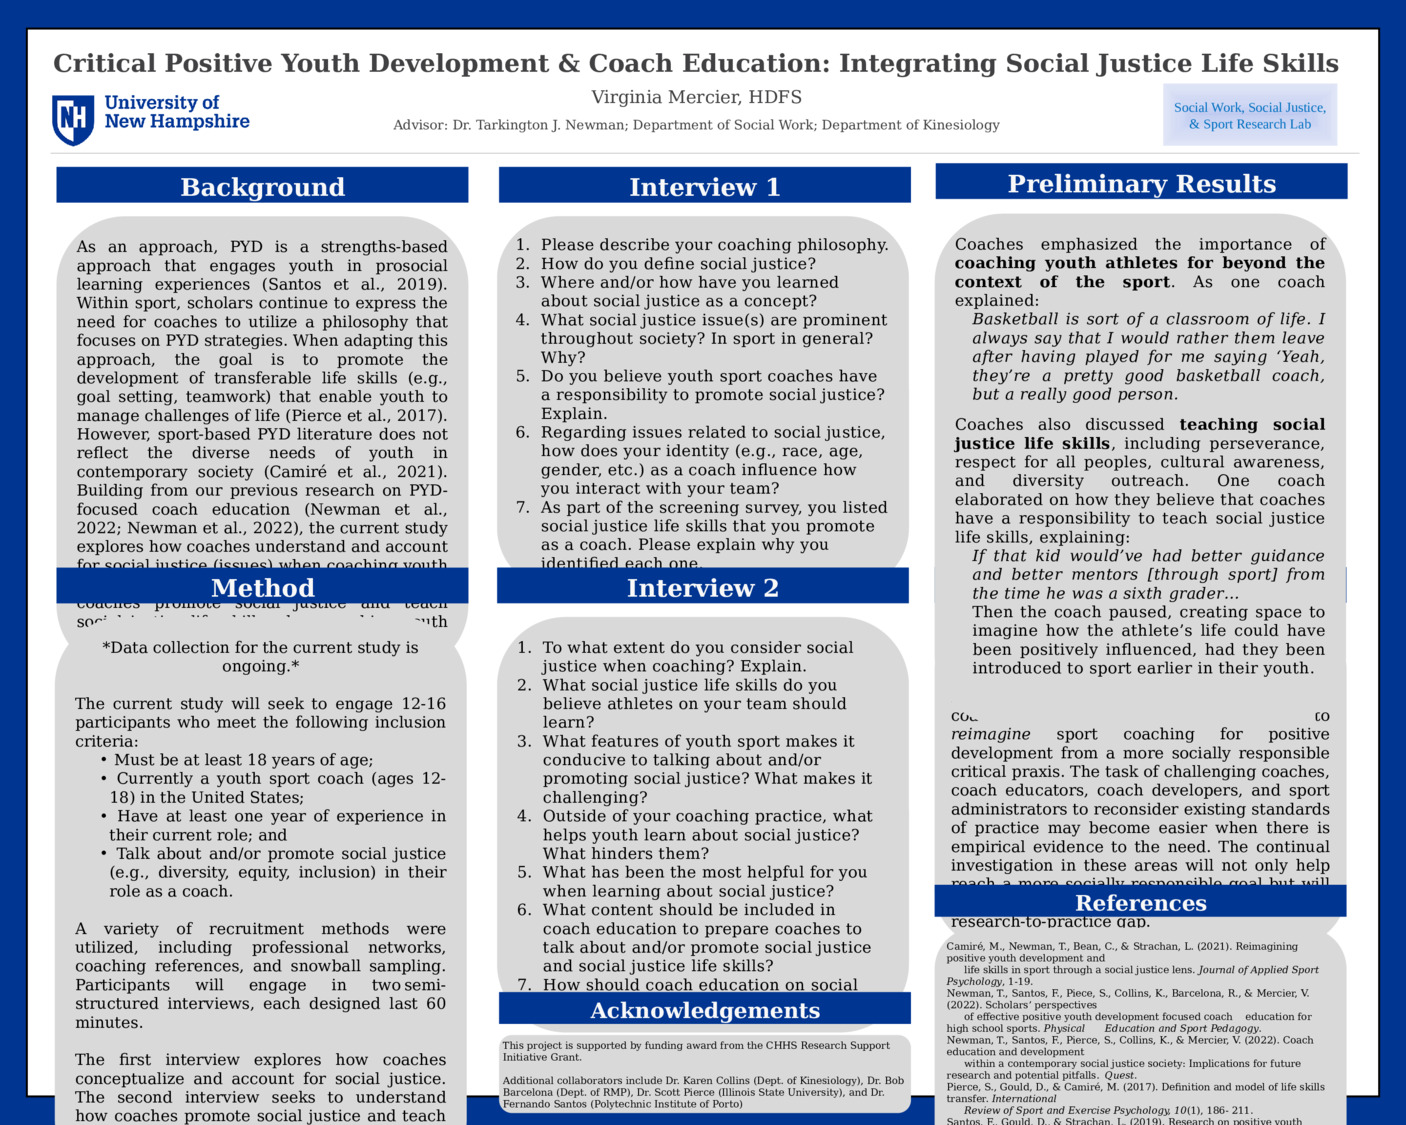 Critical Positive Youth Development & Coach Education: Integrating Social Justice Life Skills by vjm1007